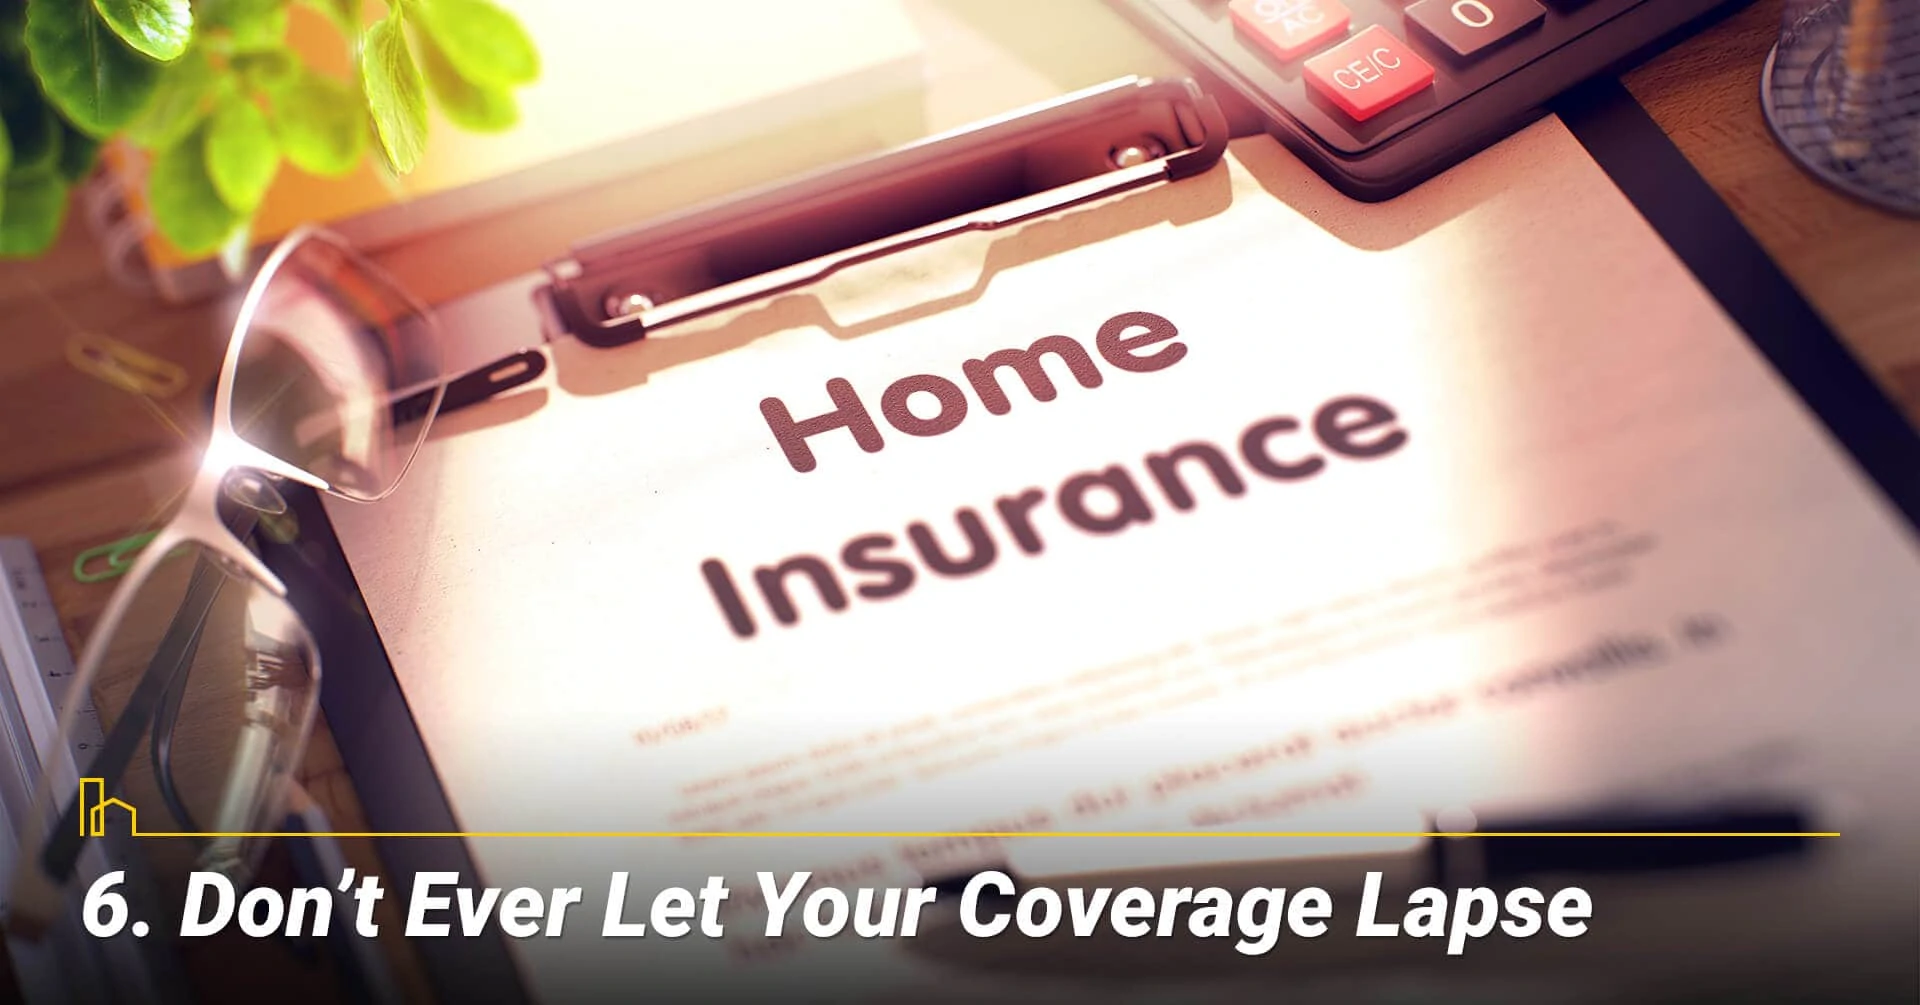 Don't Ever Let Your Coverage Lapse, keep your coverage on